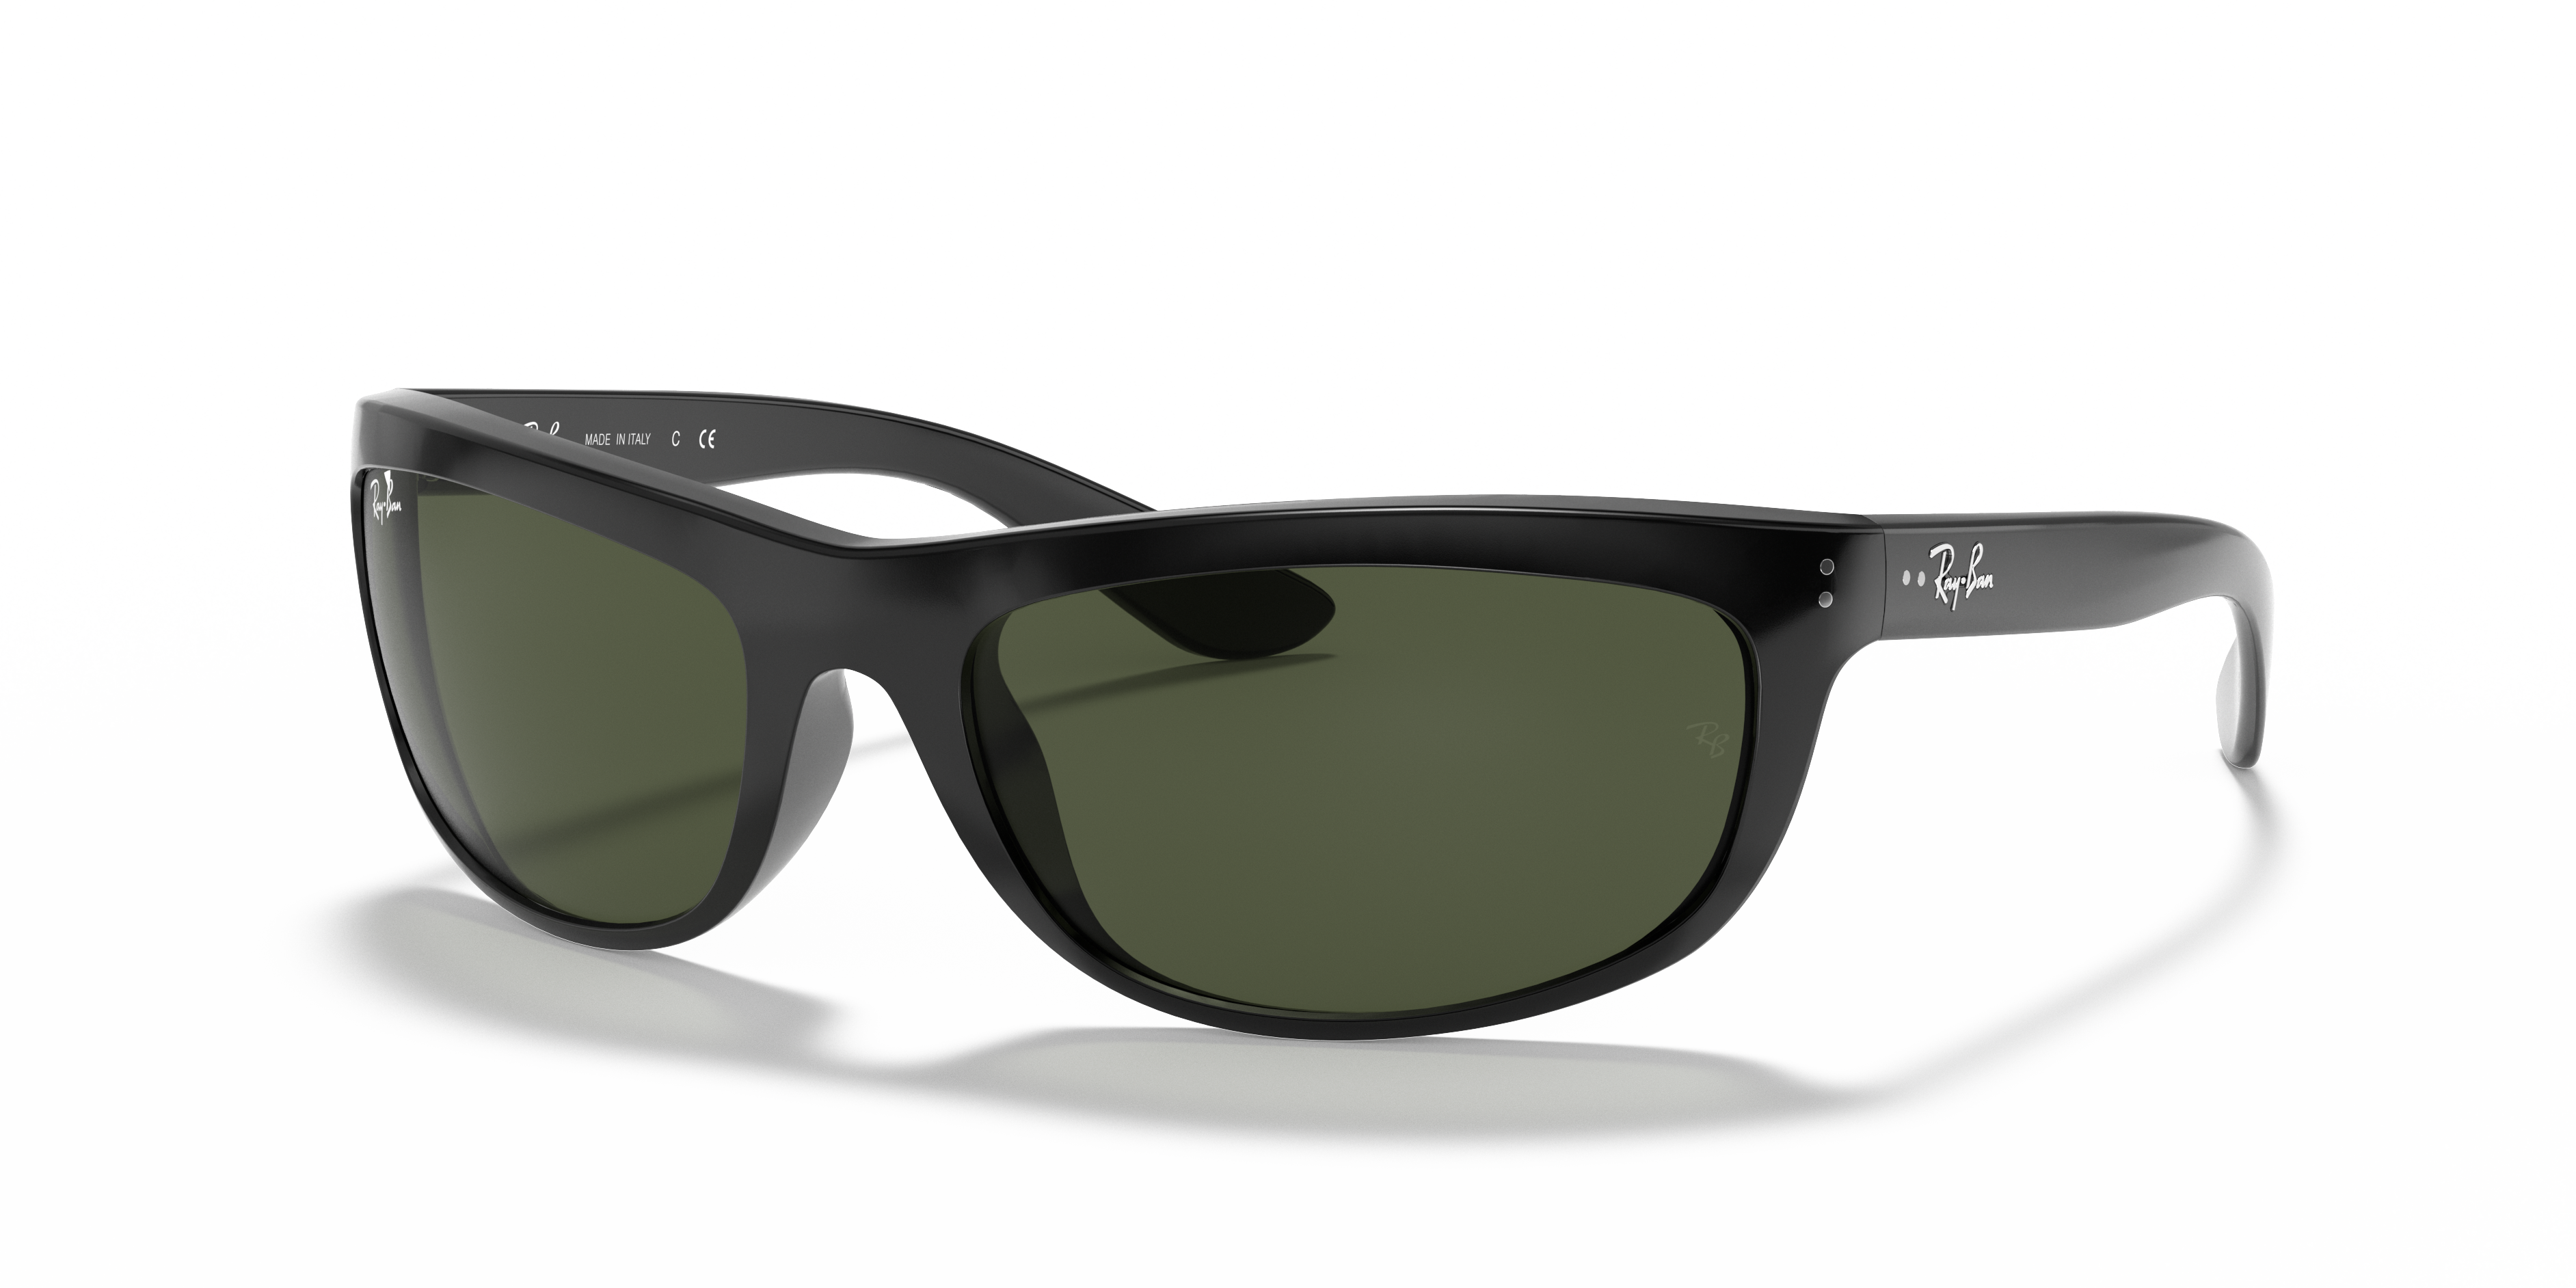 Sunglass Hut Gift Card | 5% cashback, Coupons & Promo Codes